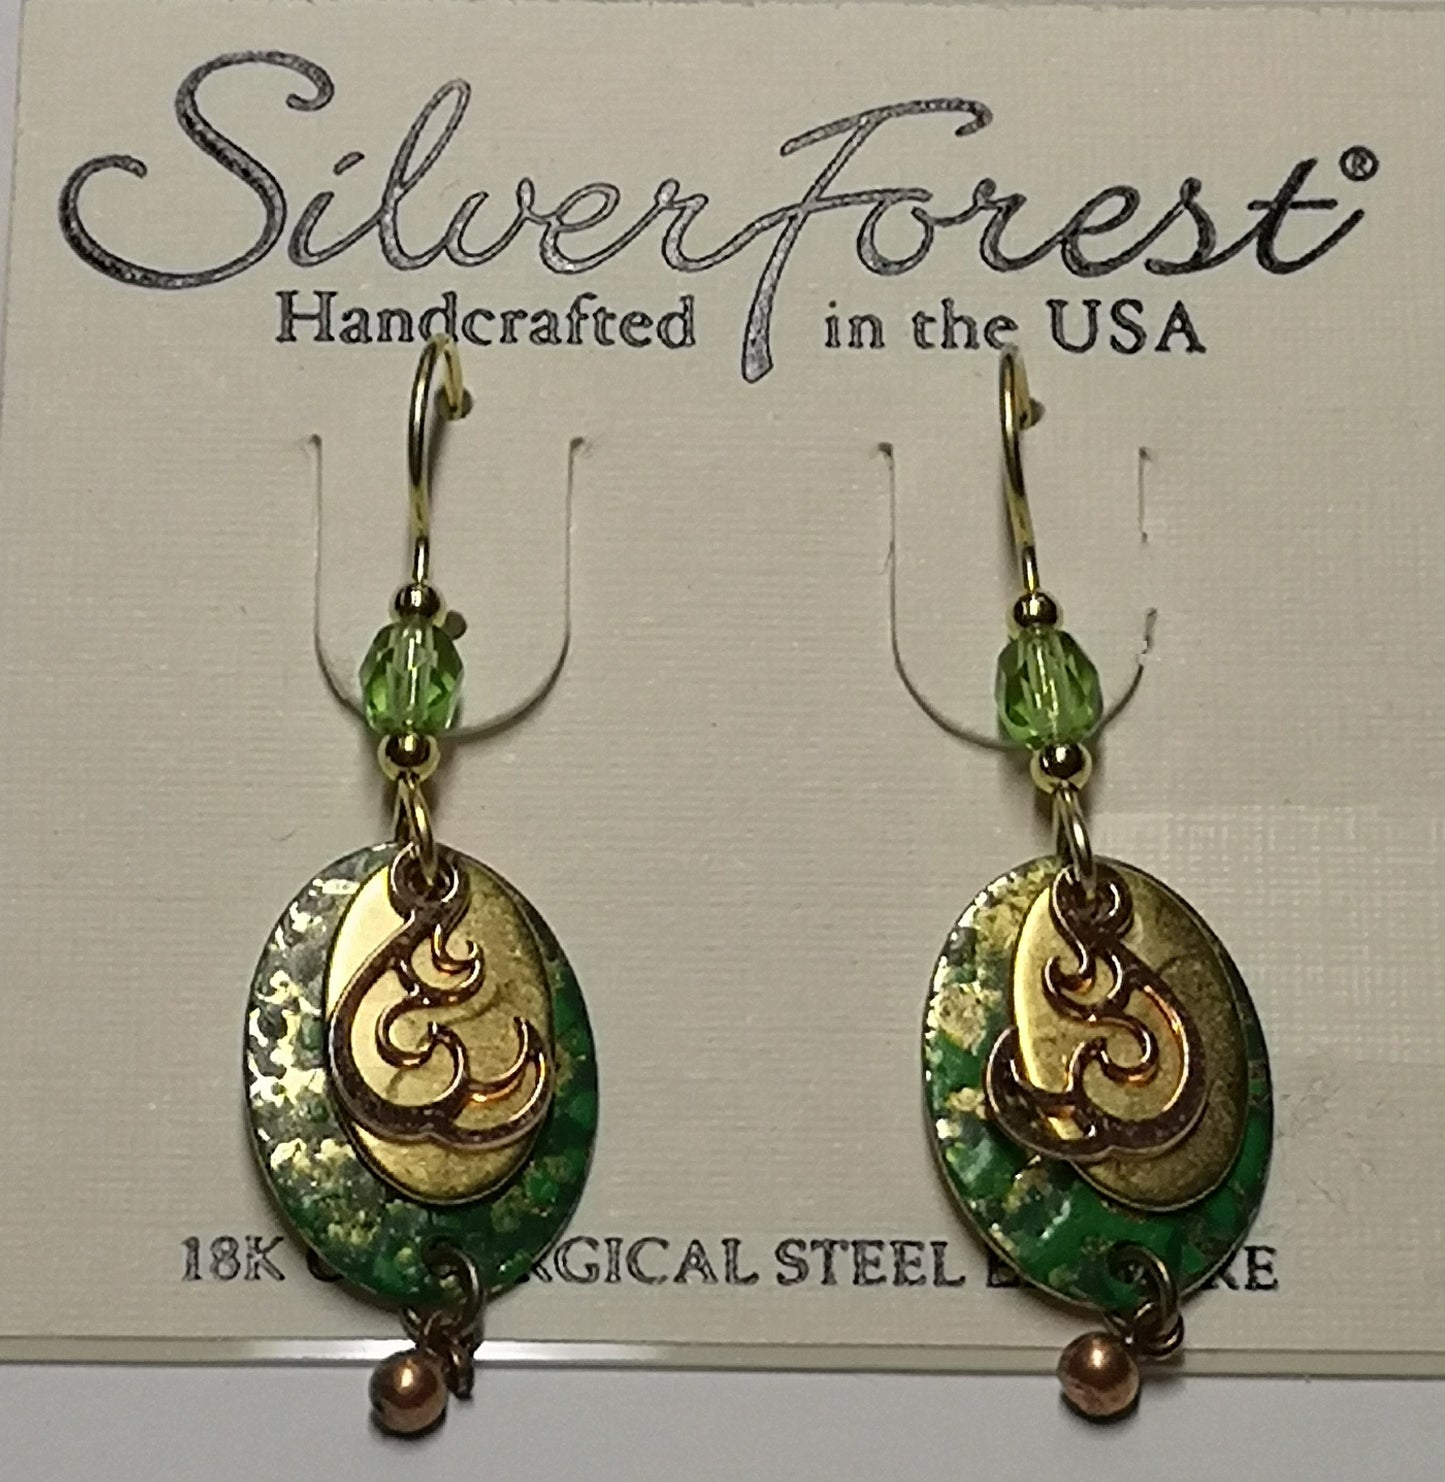 Silver forest 18kt gold plated surgical steel green earrings